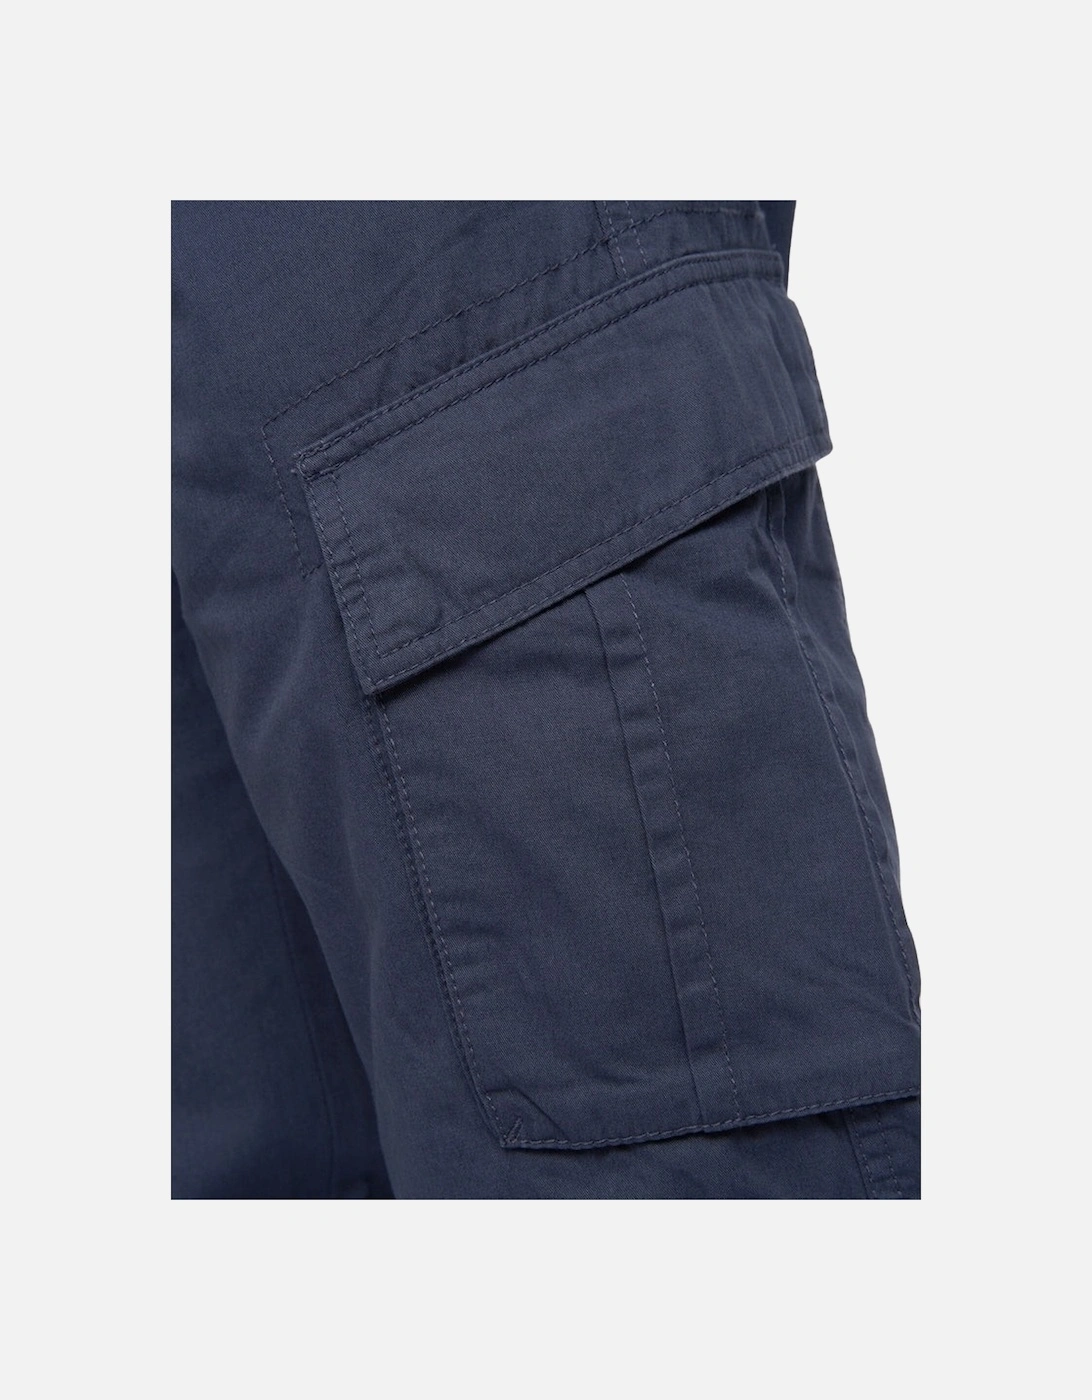 Mens Sidemoore Cargo Trousers